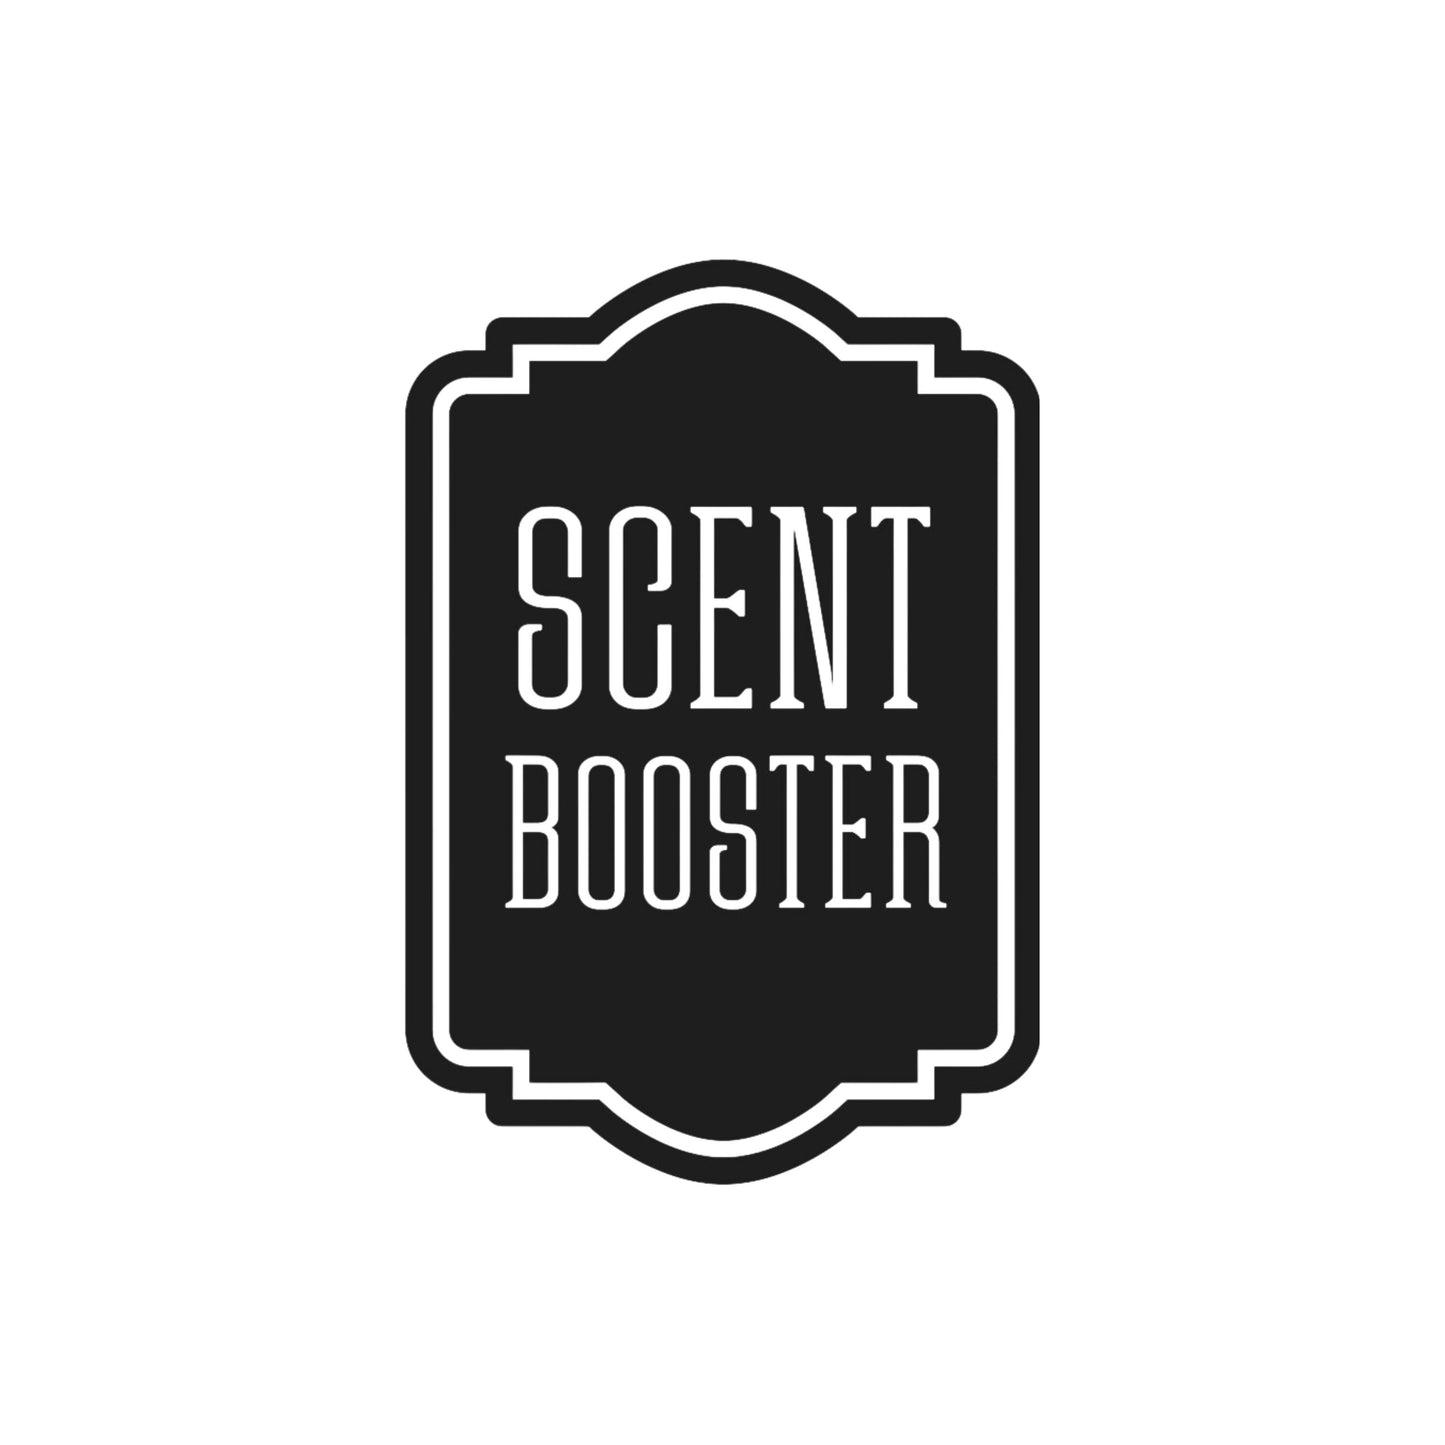 Scent Booster Decal, organized laundry room, cleaning products labels, container decal for laundry scent beads, DECAL ONLY